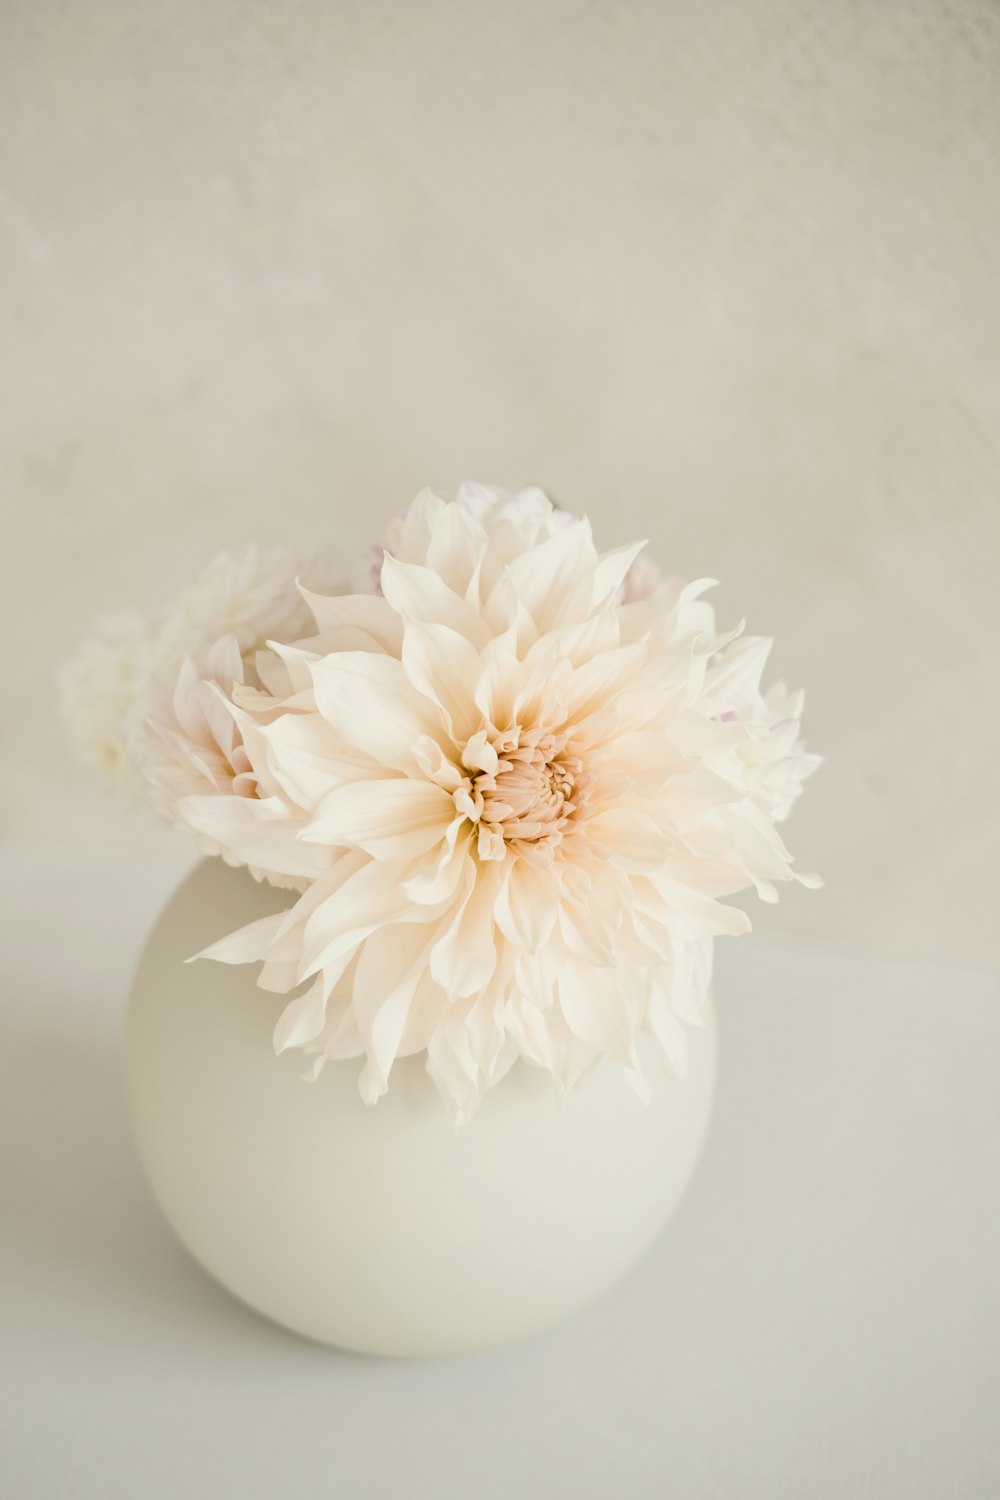 a white vase with a white flower in it